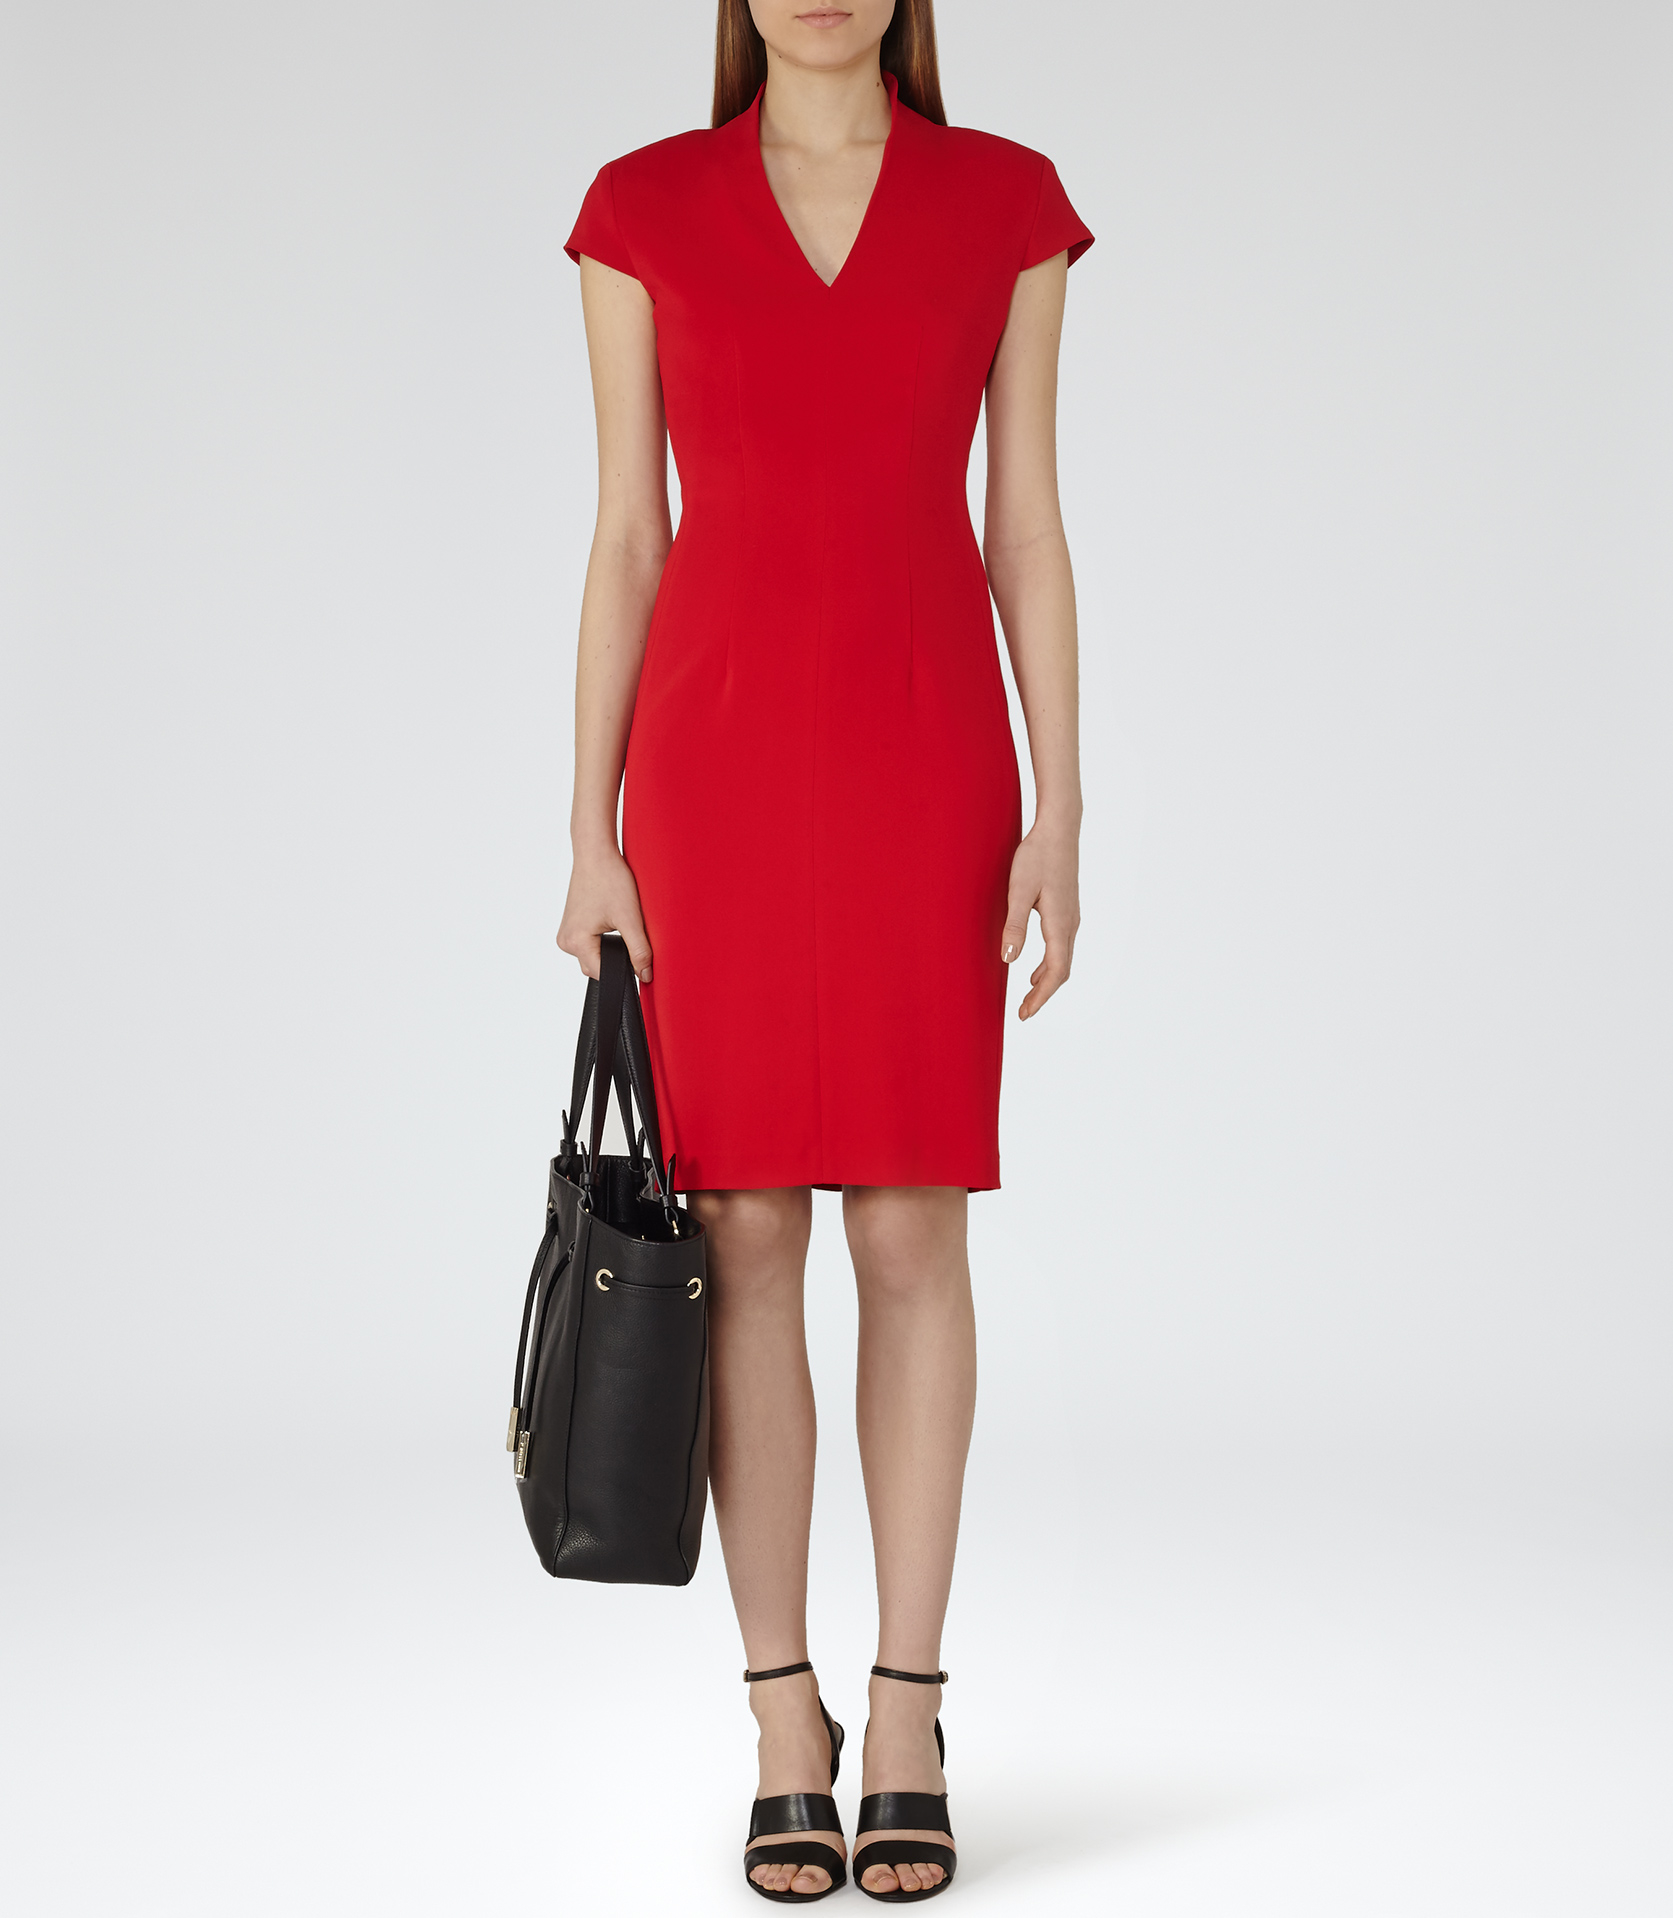 Reiss Valeria Capped-sleeve Dress in Ruby (Red) - Lyst